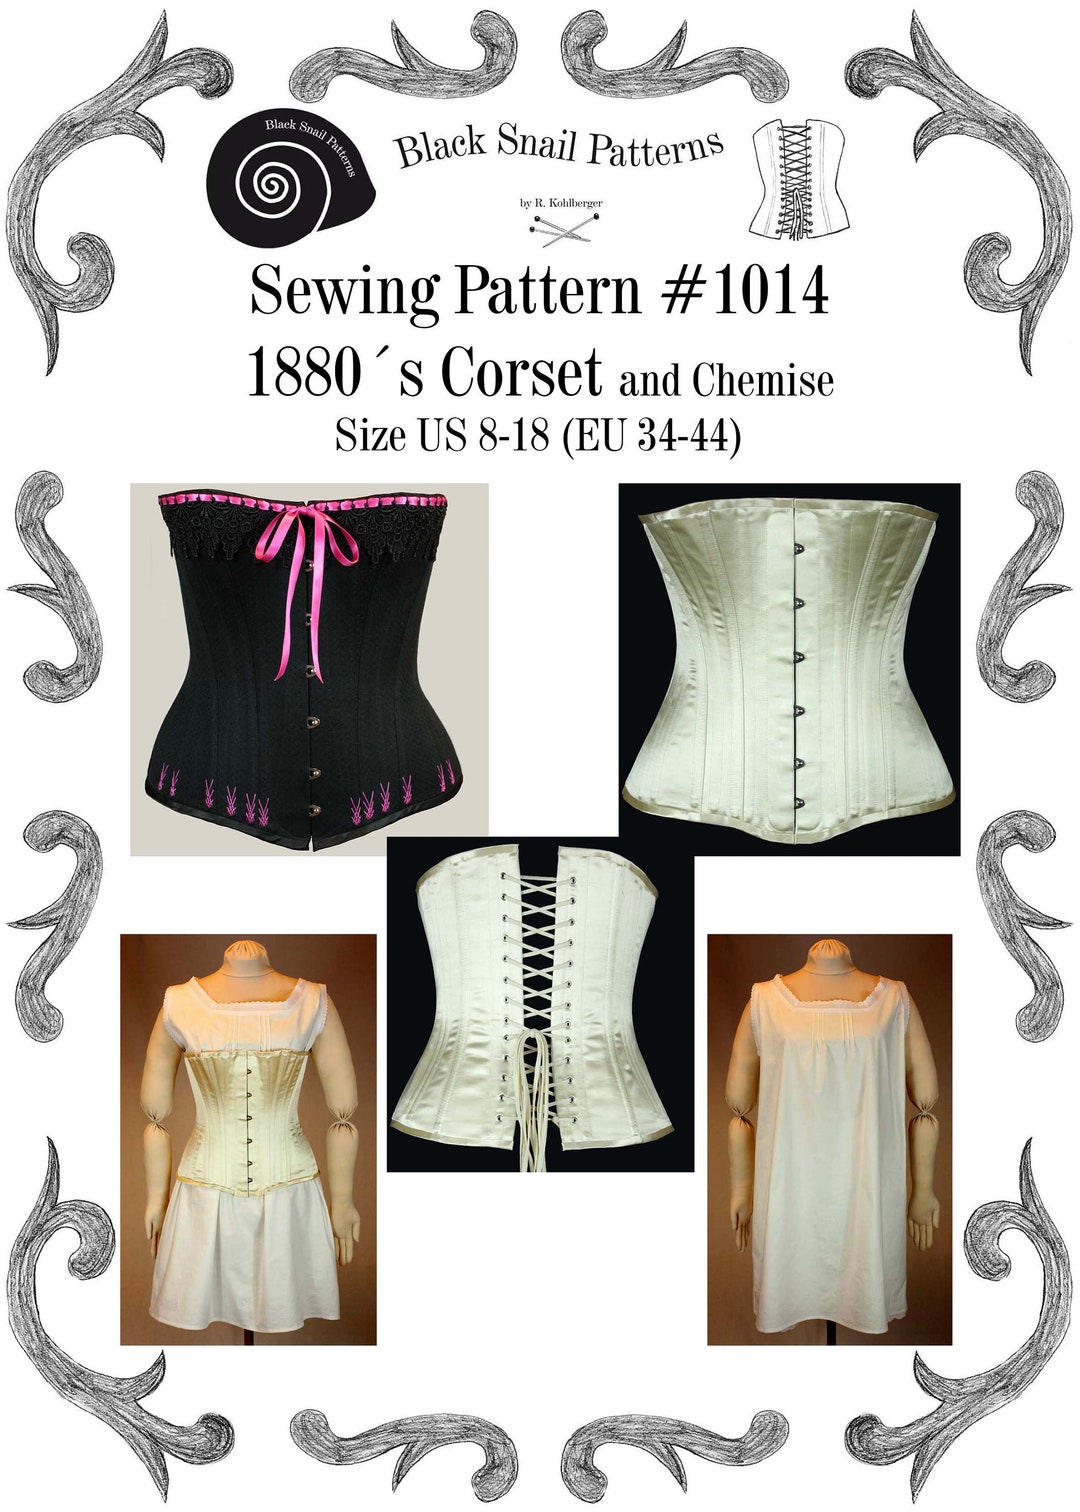 CORSETS - 16 Different types (and some interesting facts you may